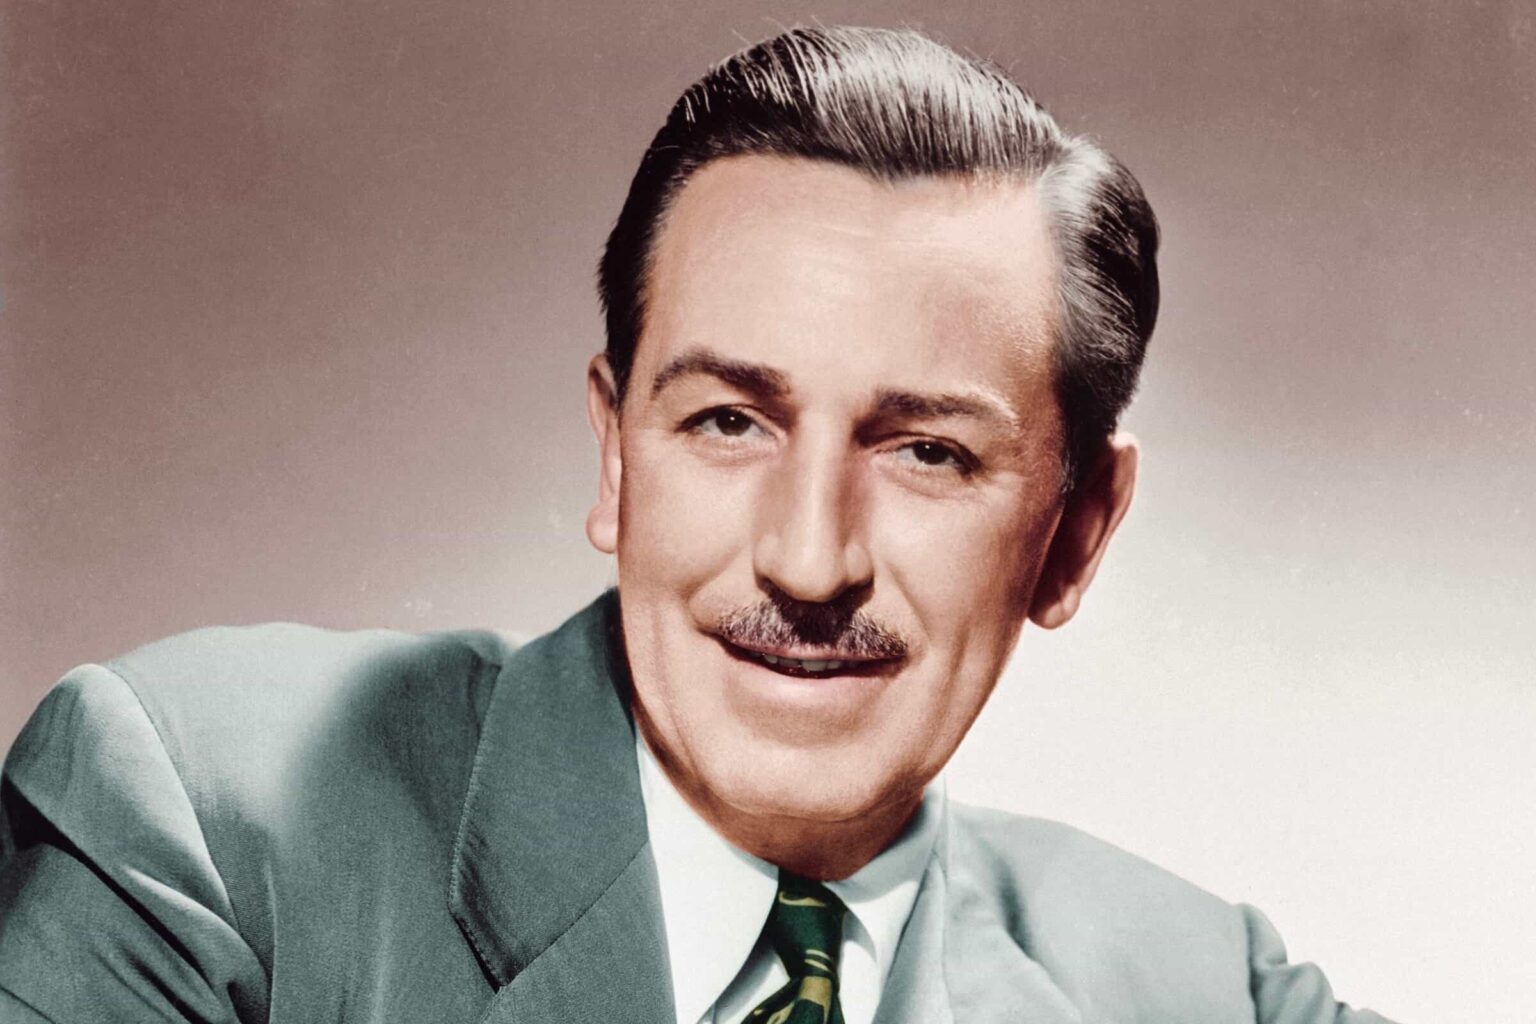 Unless you live under a rock, we're sure you know what Disney is. Check out the net worth of Walt Disney, the legend who started it all, here.